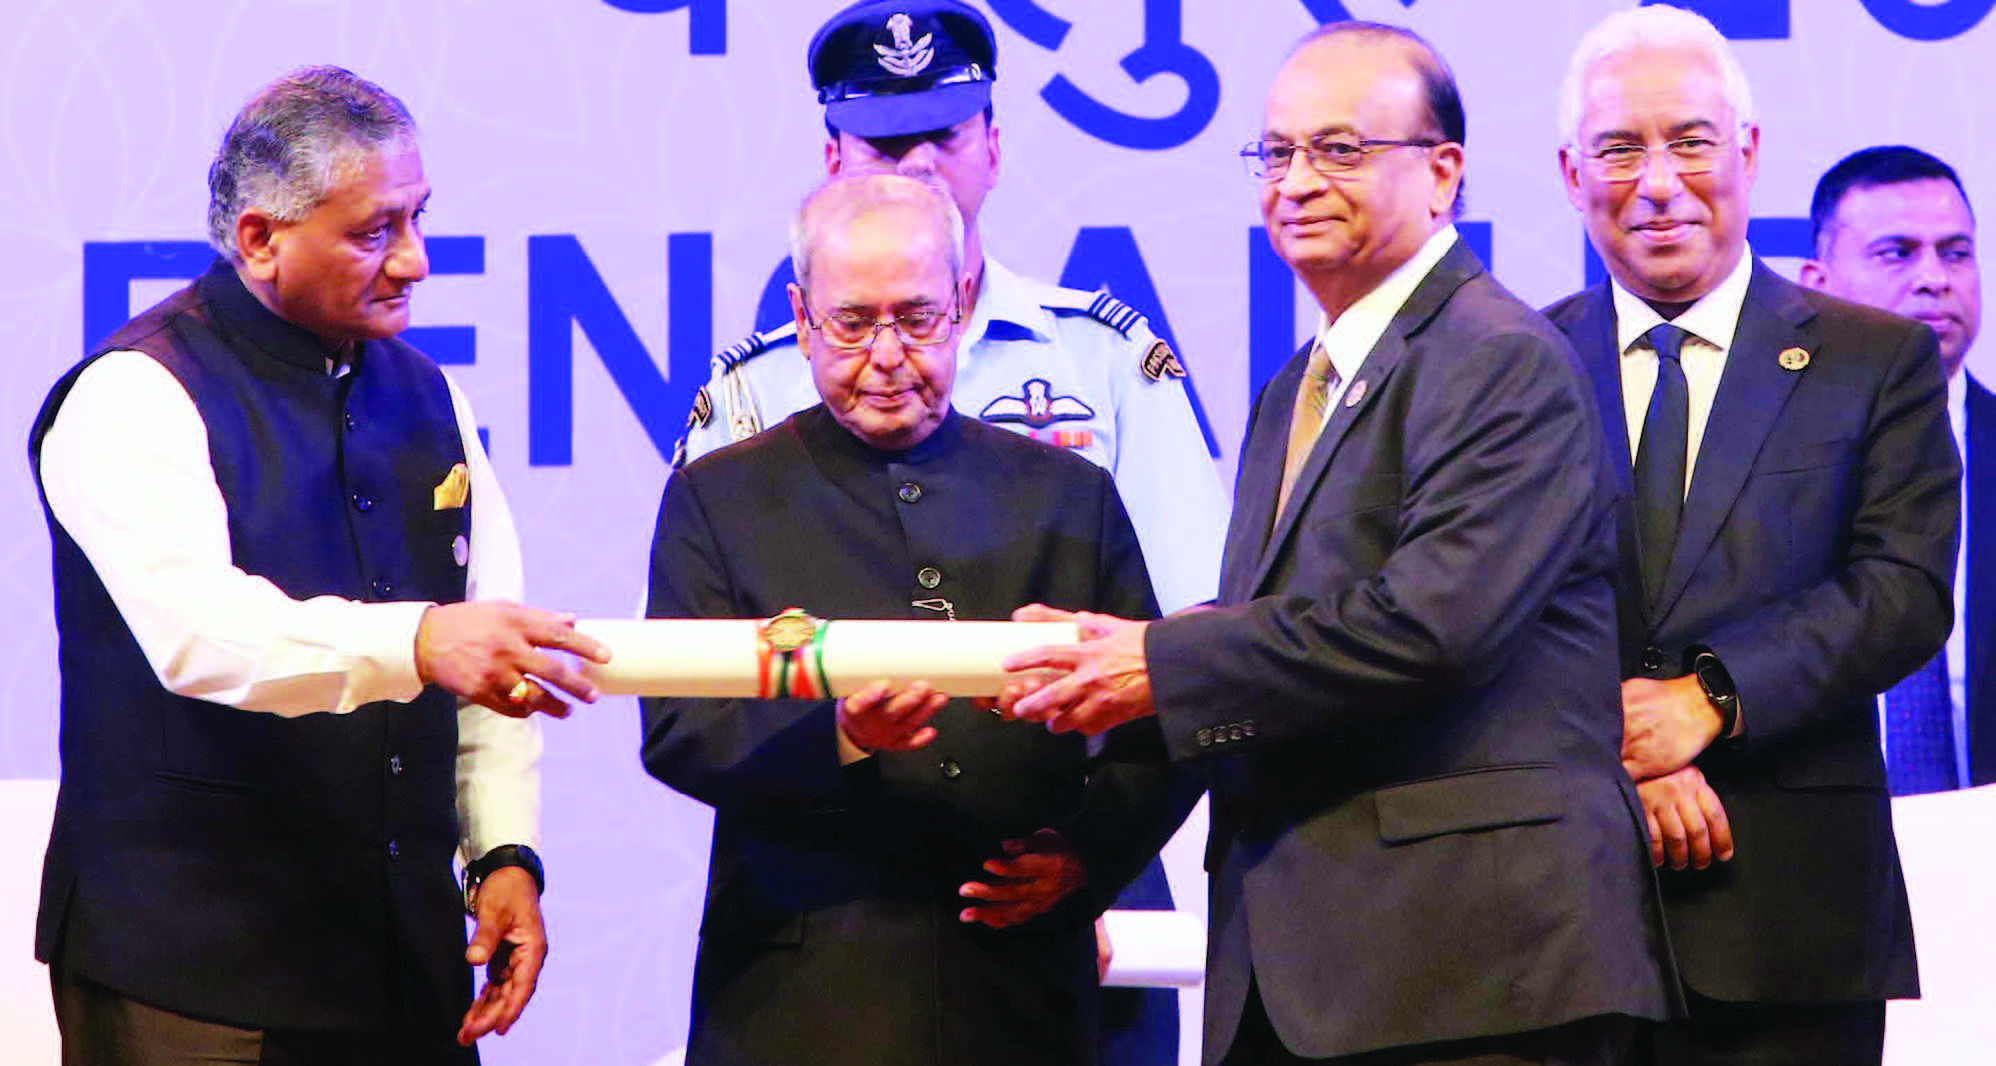 Dr. Bharat Barai of Chicago receiving the Pravasi Bharatiya Samman from President of India. Seen from L to R: General VK Singh, Minister of State for External affairs, President Pranab Mukherjee, Dr. Bharat Barai and Luiss da Costa, Prime Minister of Portugal who was also conferred the honor. Photo / Jay Mandal on assignment